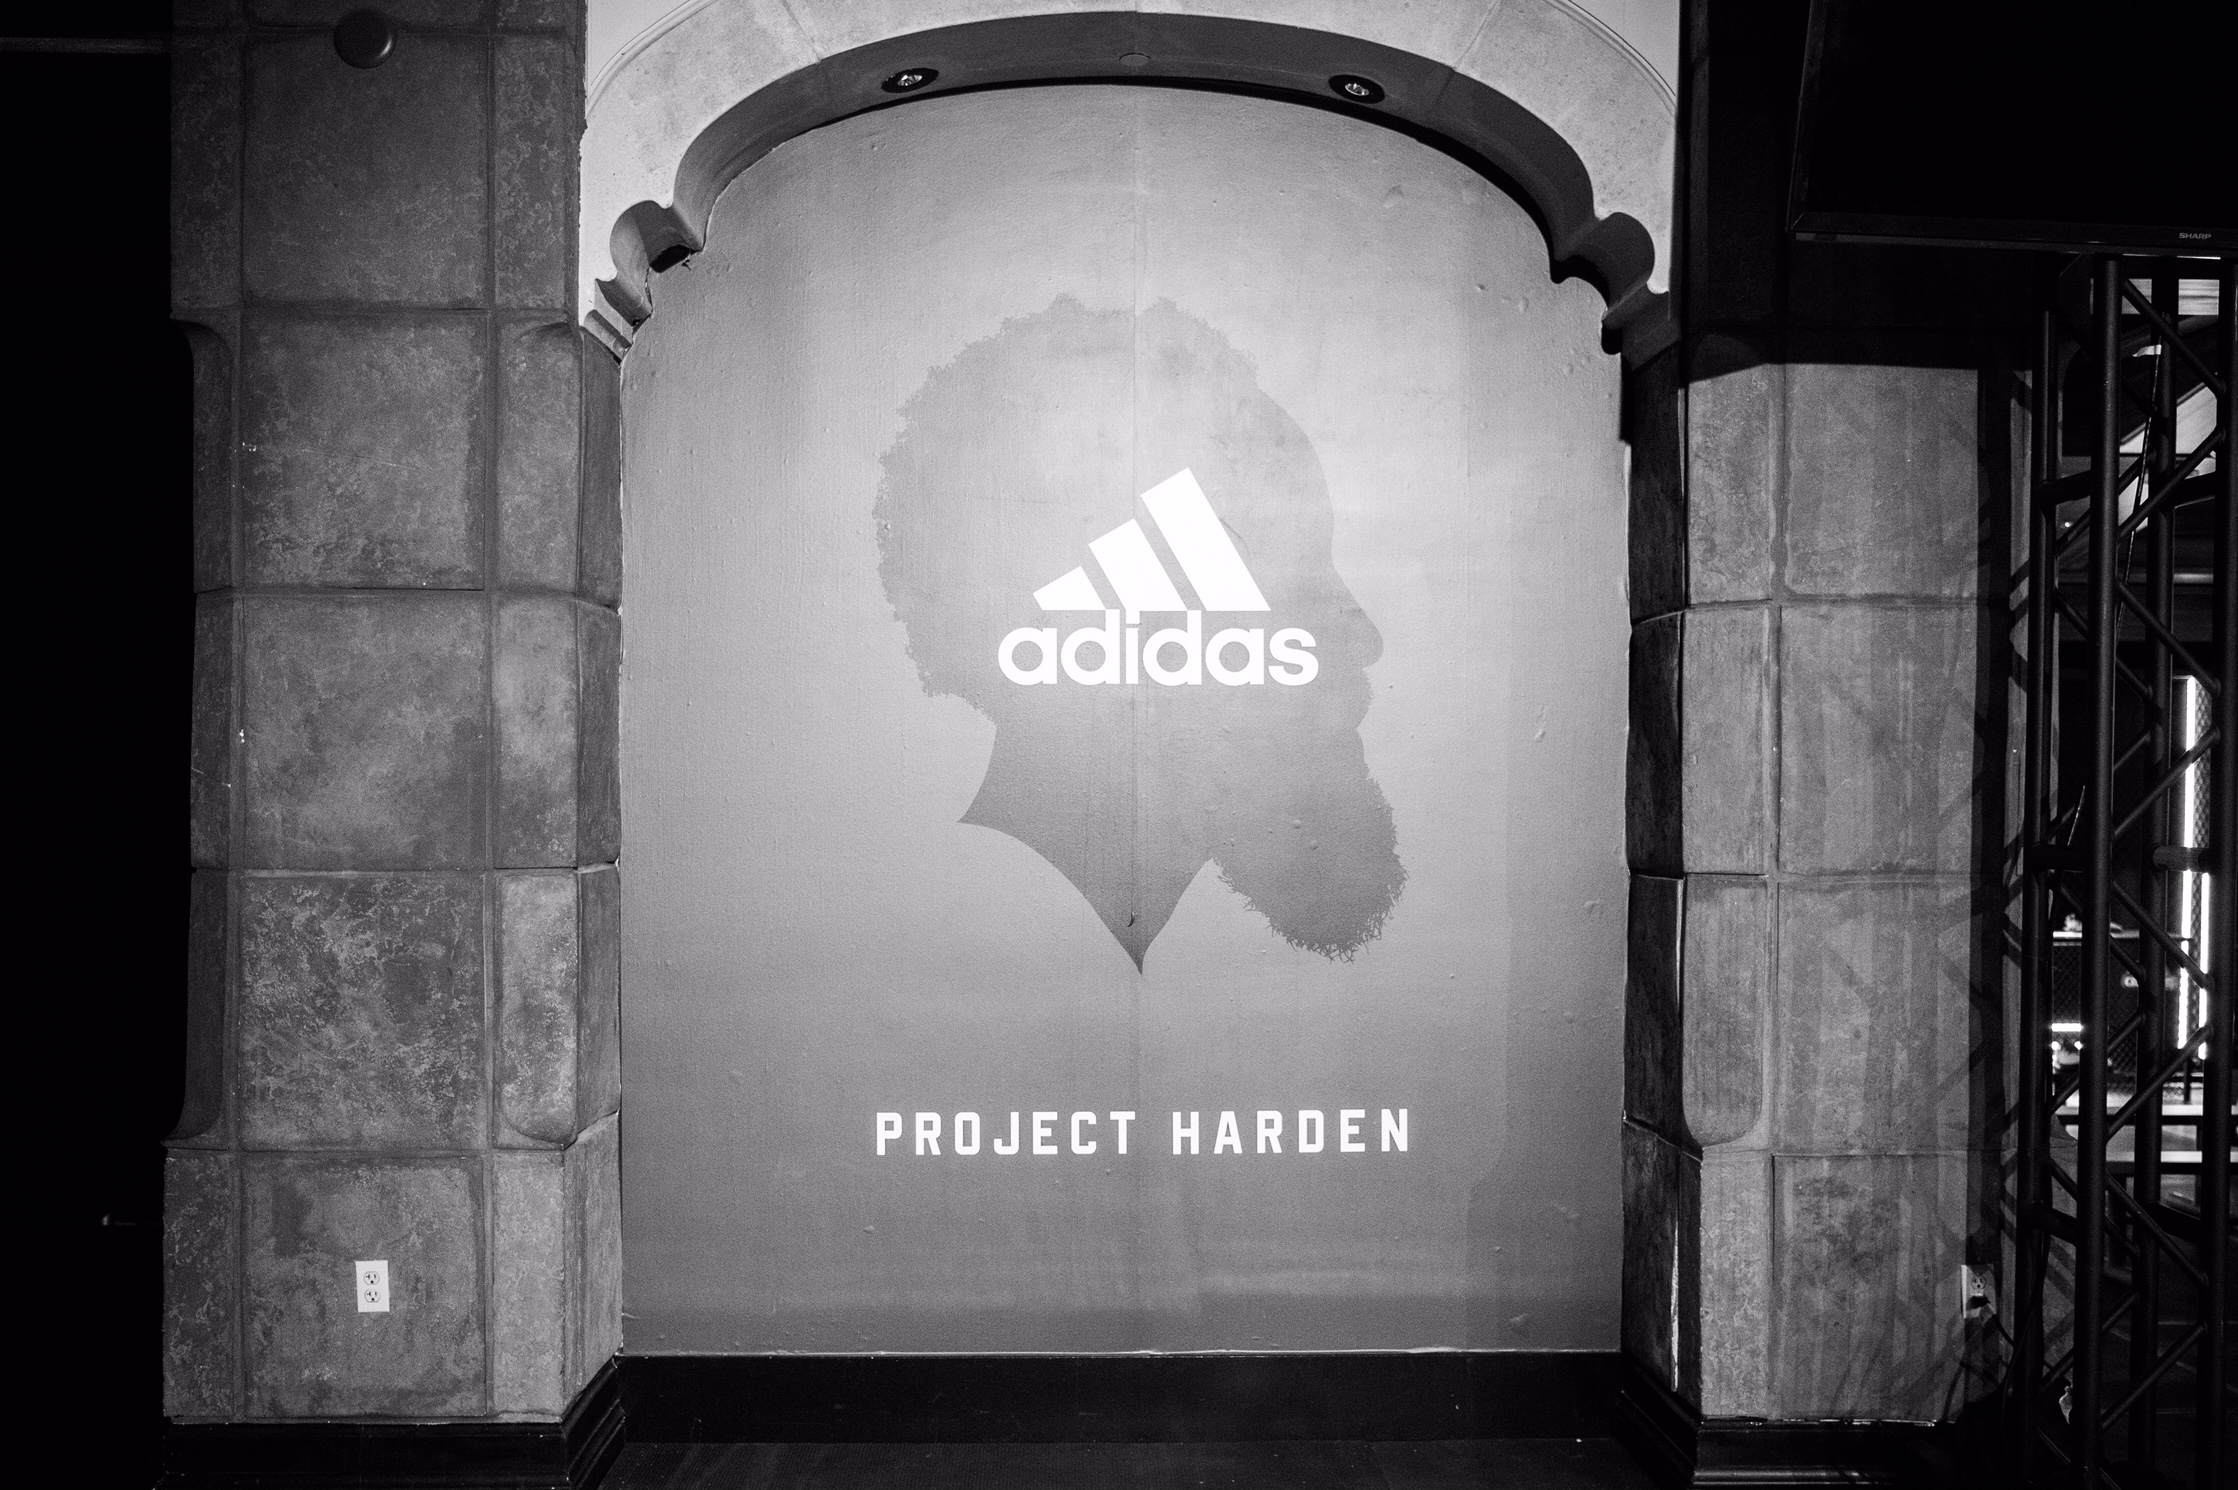 Welcome to Project Harden: The Next 